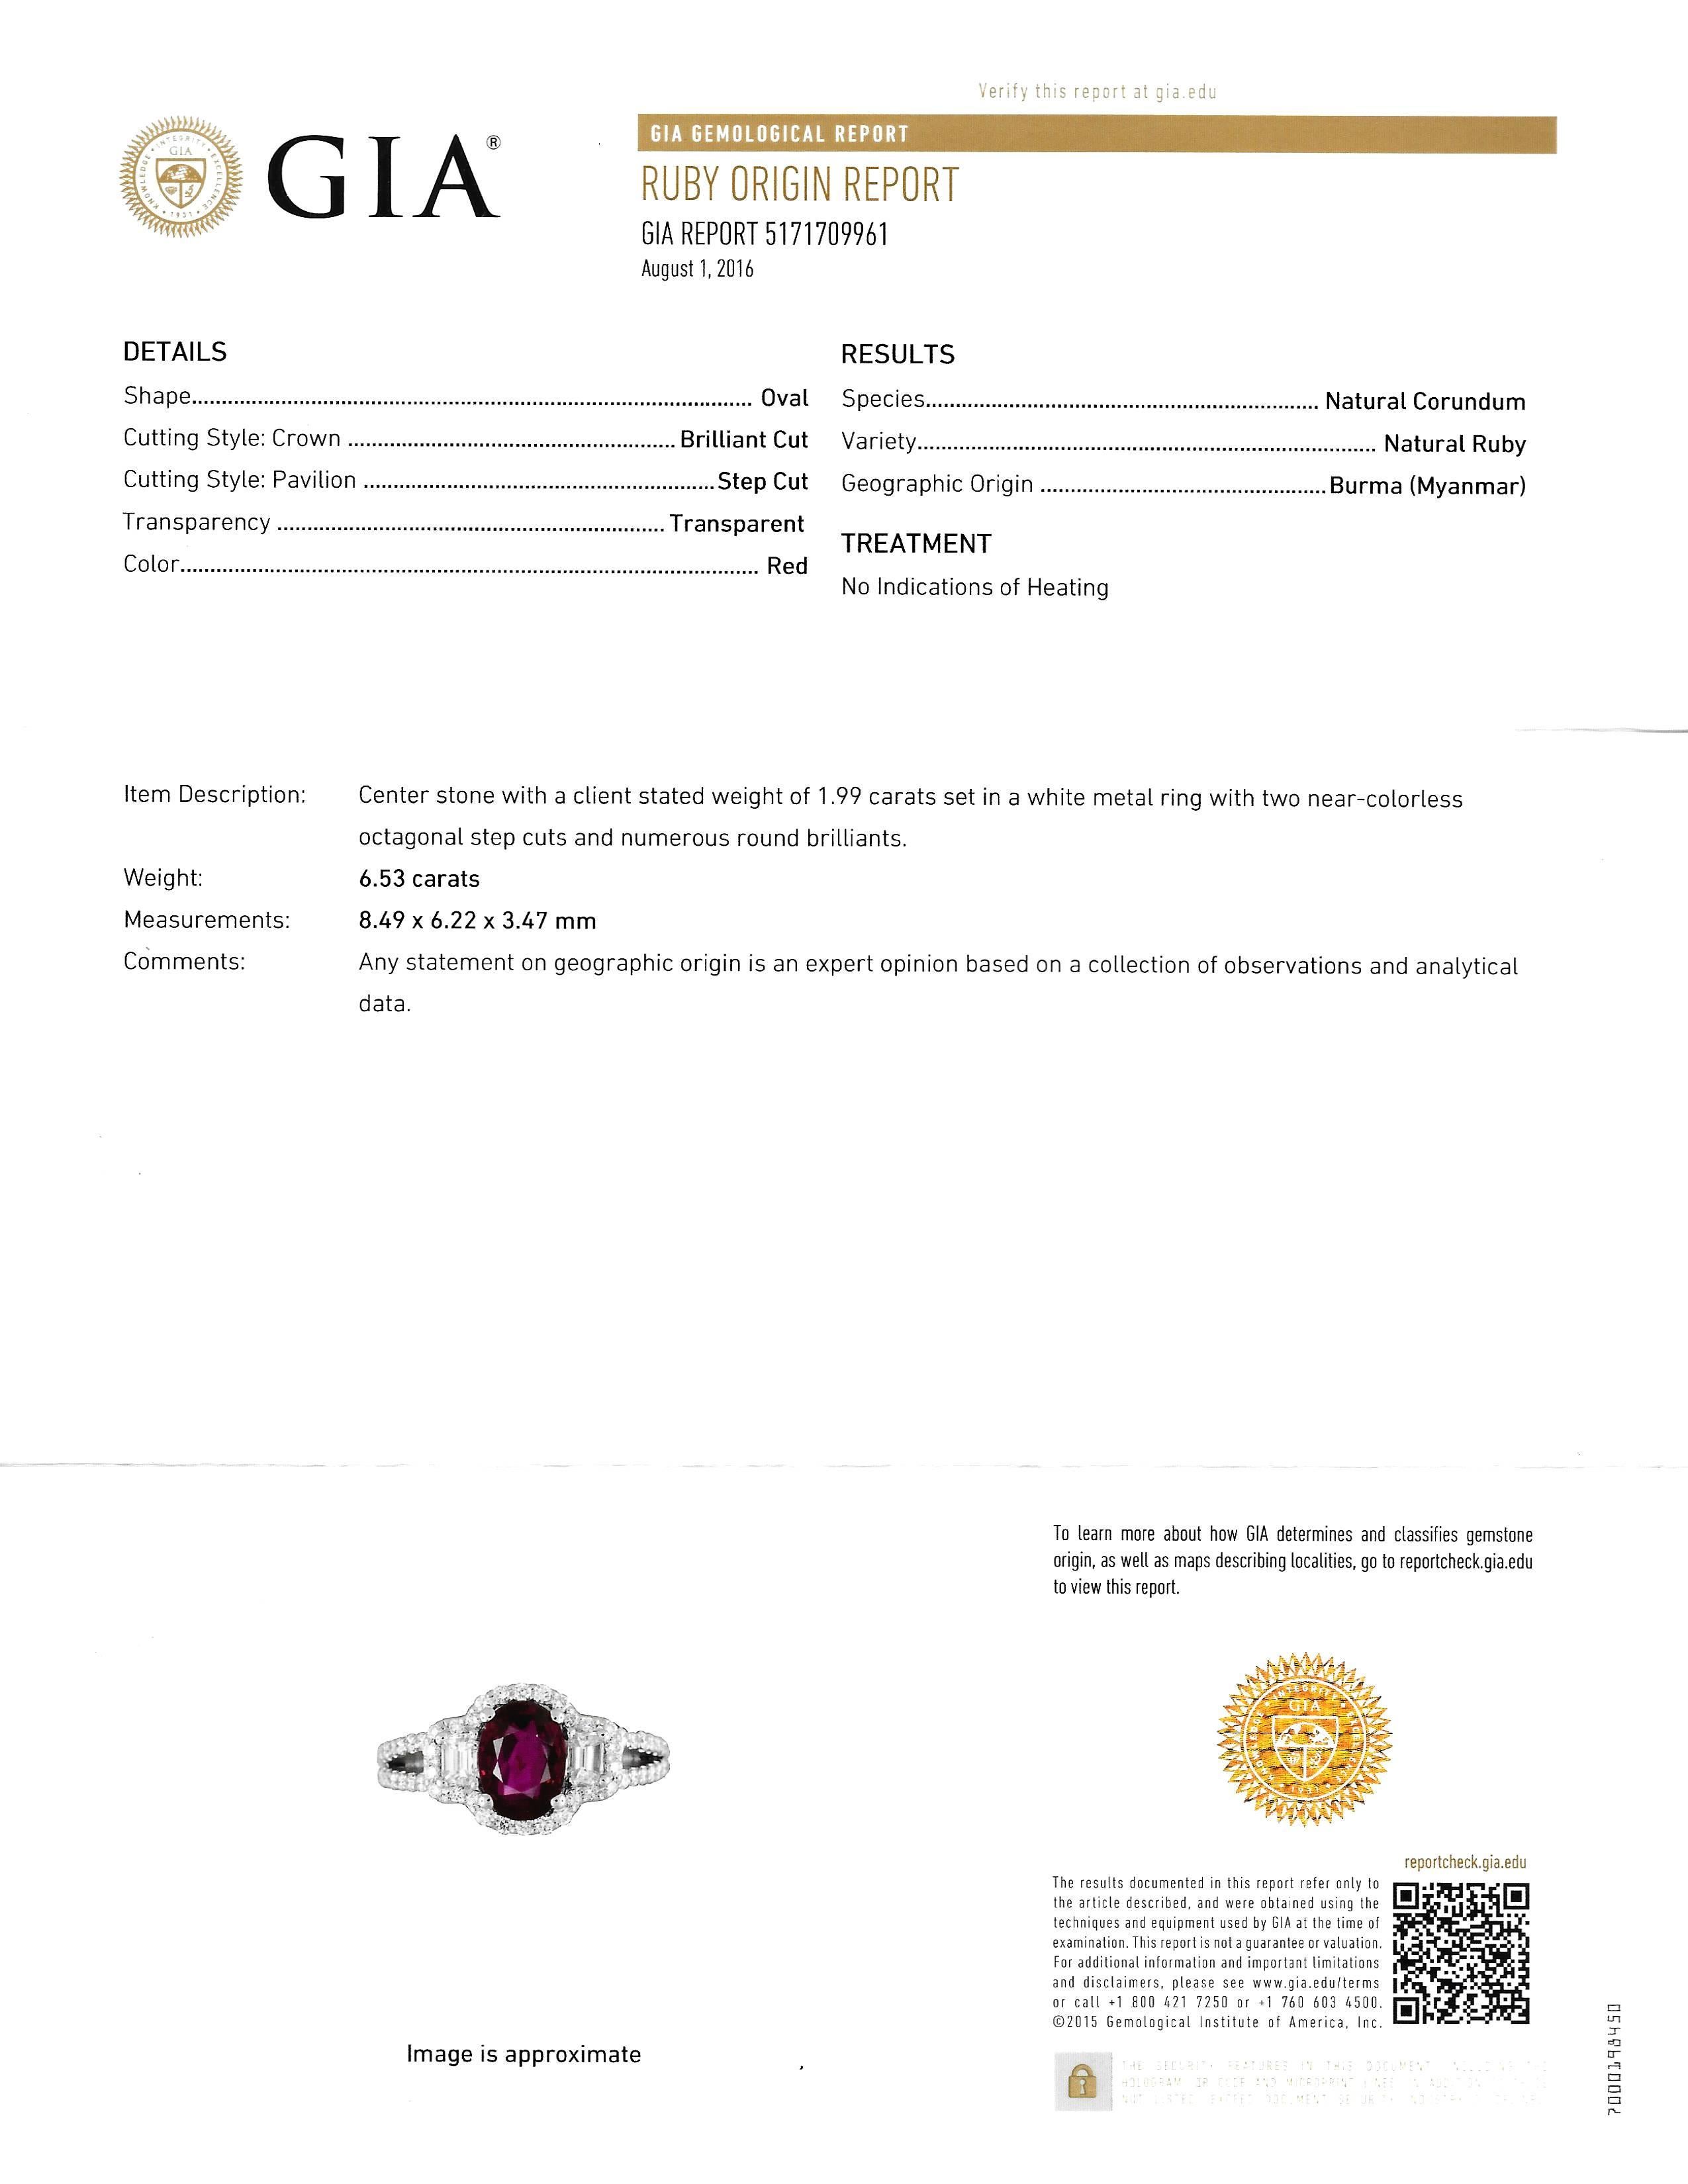 Introducing our exquisite GIA Certified No Heat Rare Burma Magok Mined Ruby, weighing 1.95 carat, Diamond, weighing 1.20 carats, Platinum Ring, a true treasure that embodies elegance, rarity, and timeless beauty. This remarkable piece is perfect for